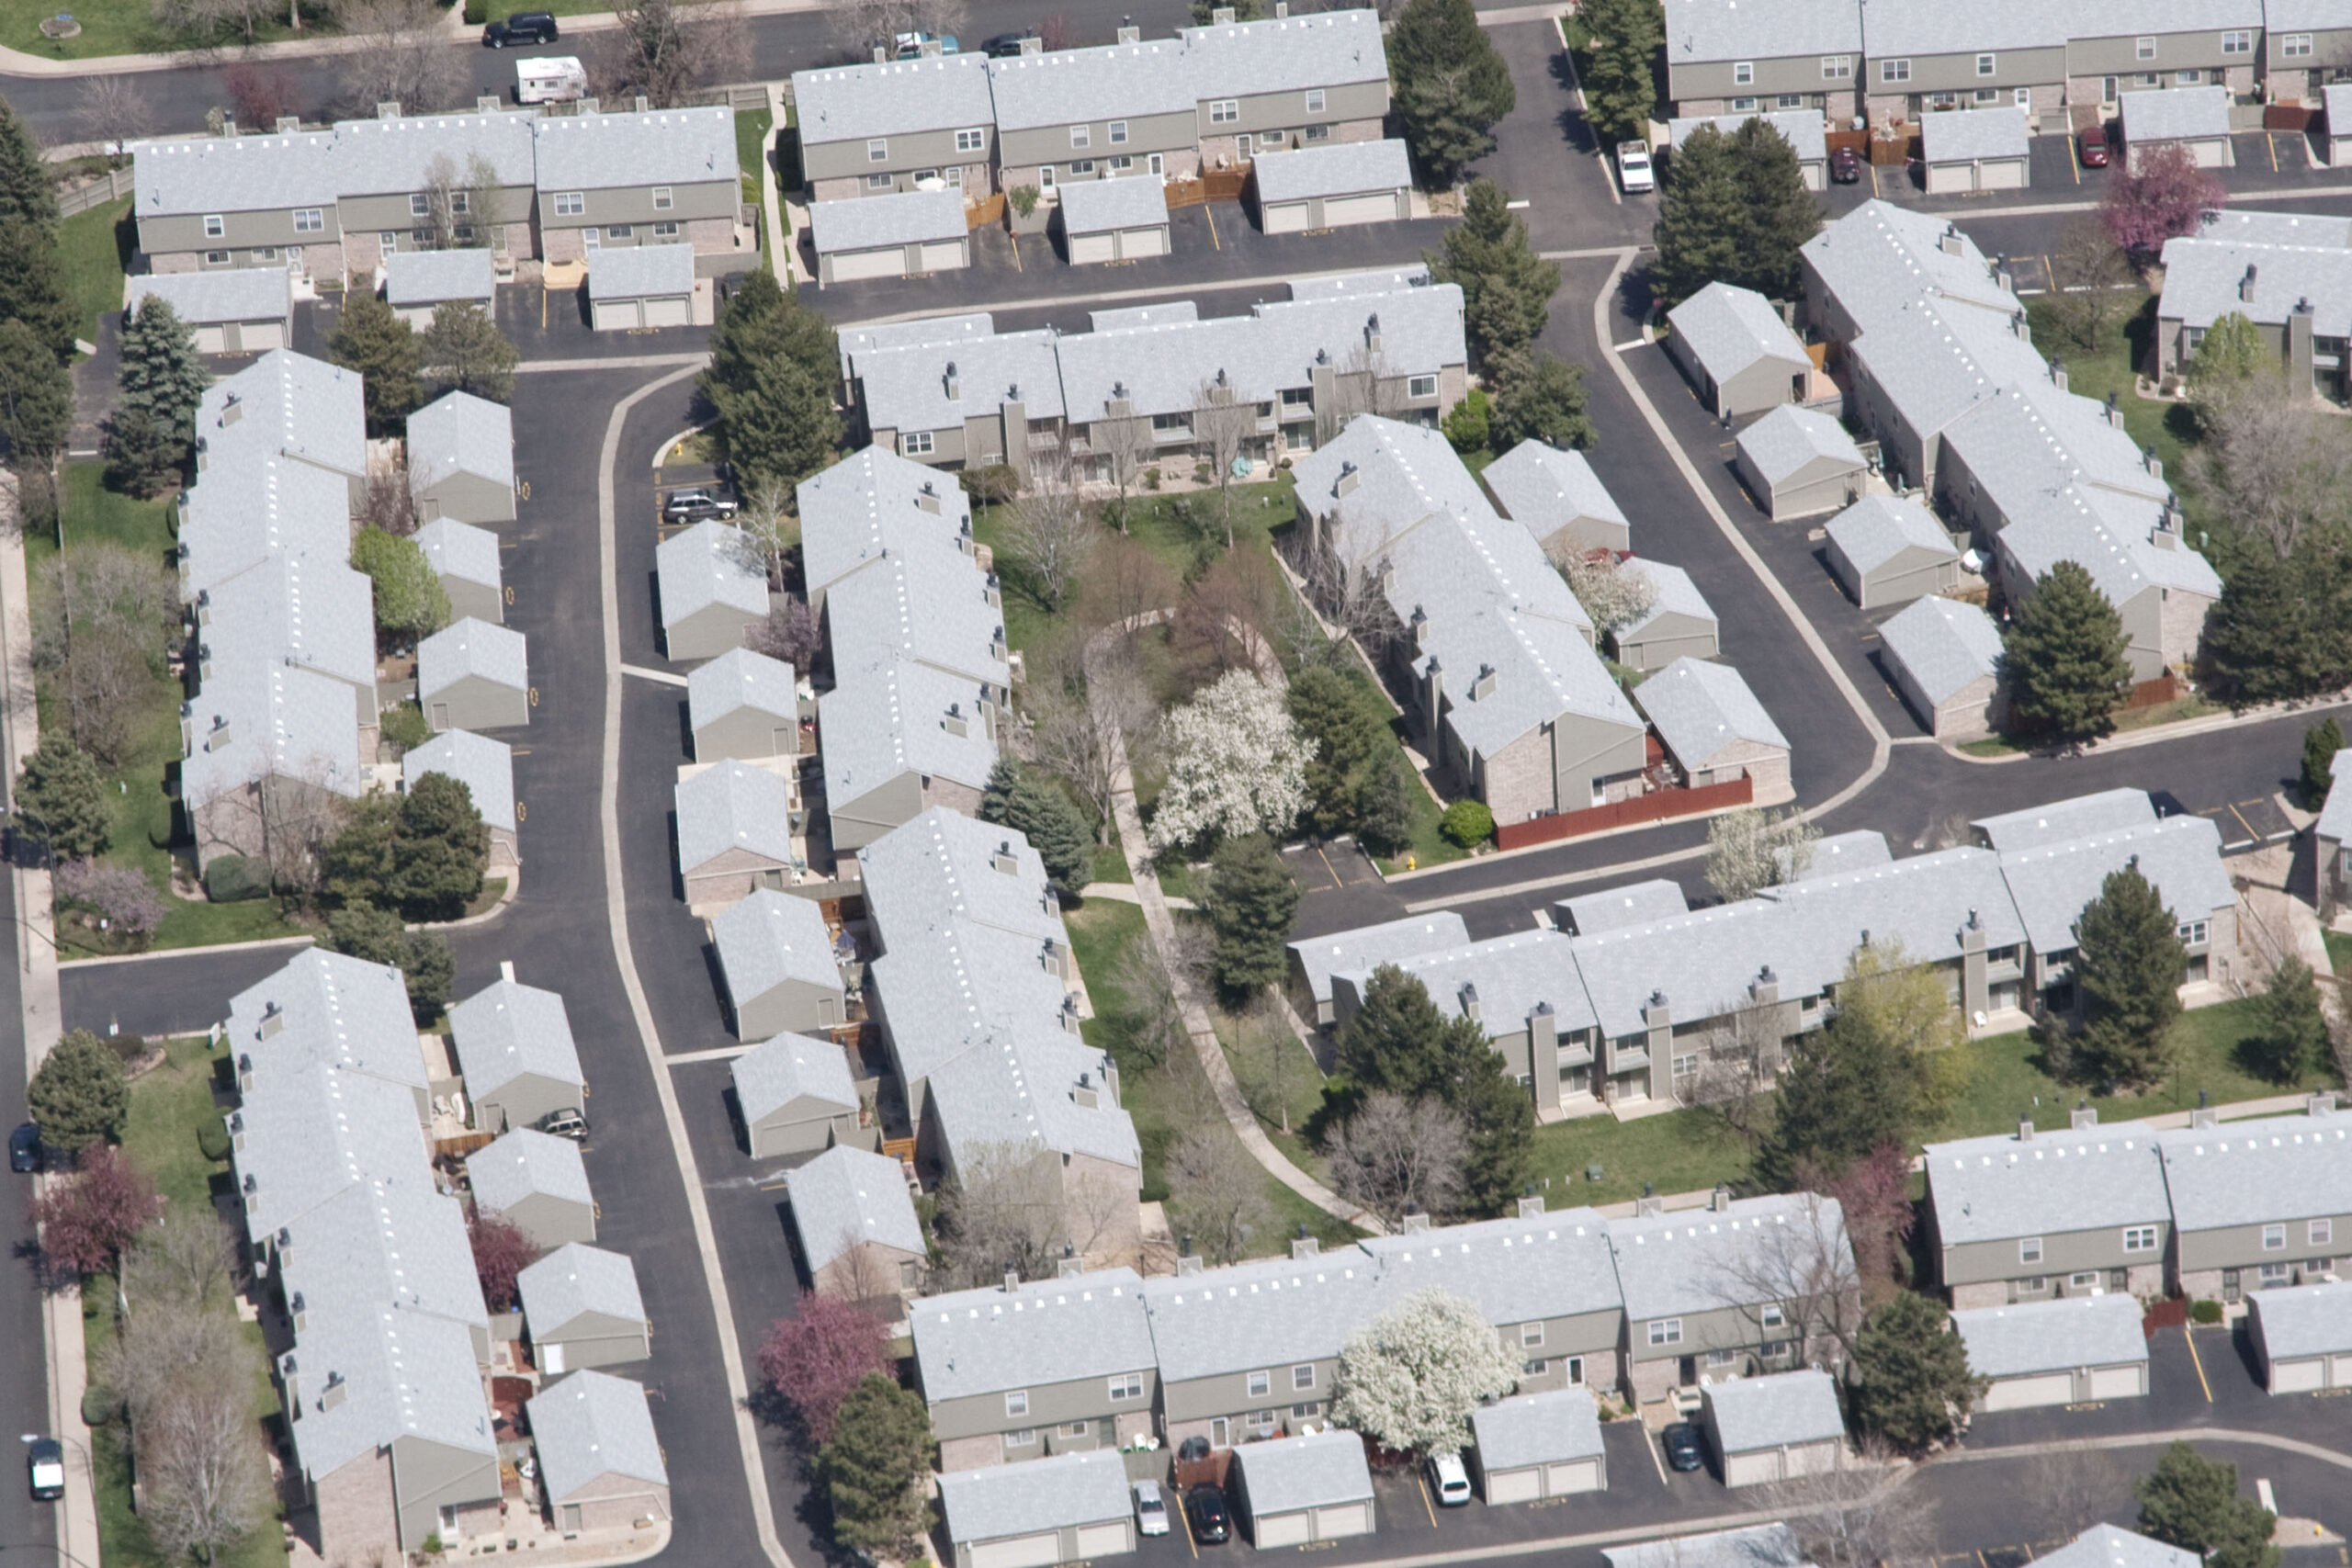 Aerial view of a suburban area with uniform houses featuring white roofs, arranged in a neat grid pattern with interspersed greenery.